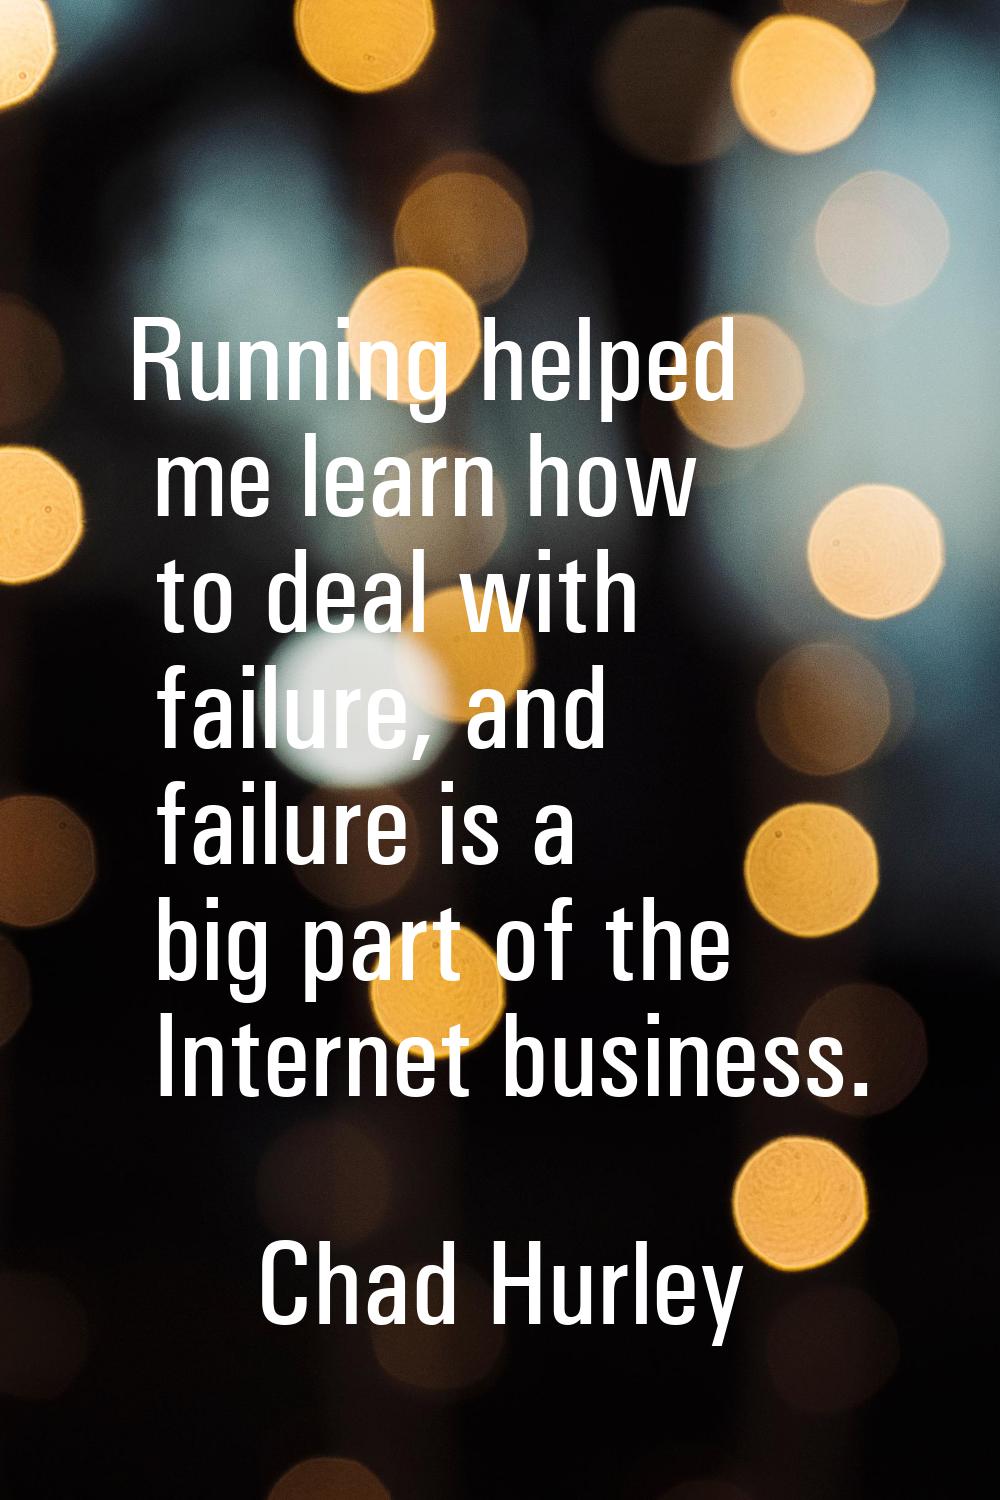 Running helped me learn how to deal with failure, and failure is a big part of the Internet busines